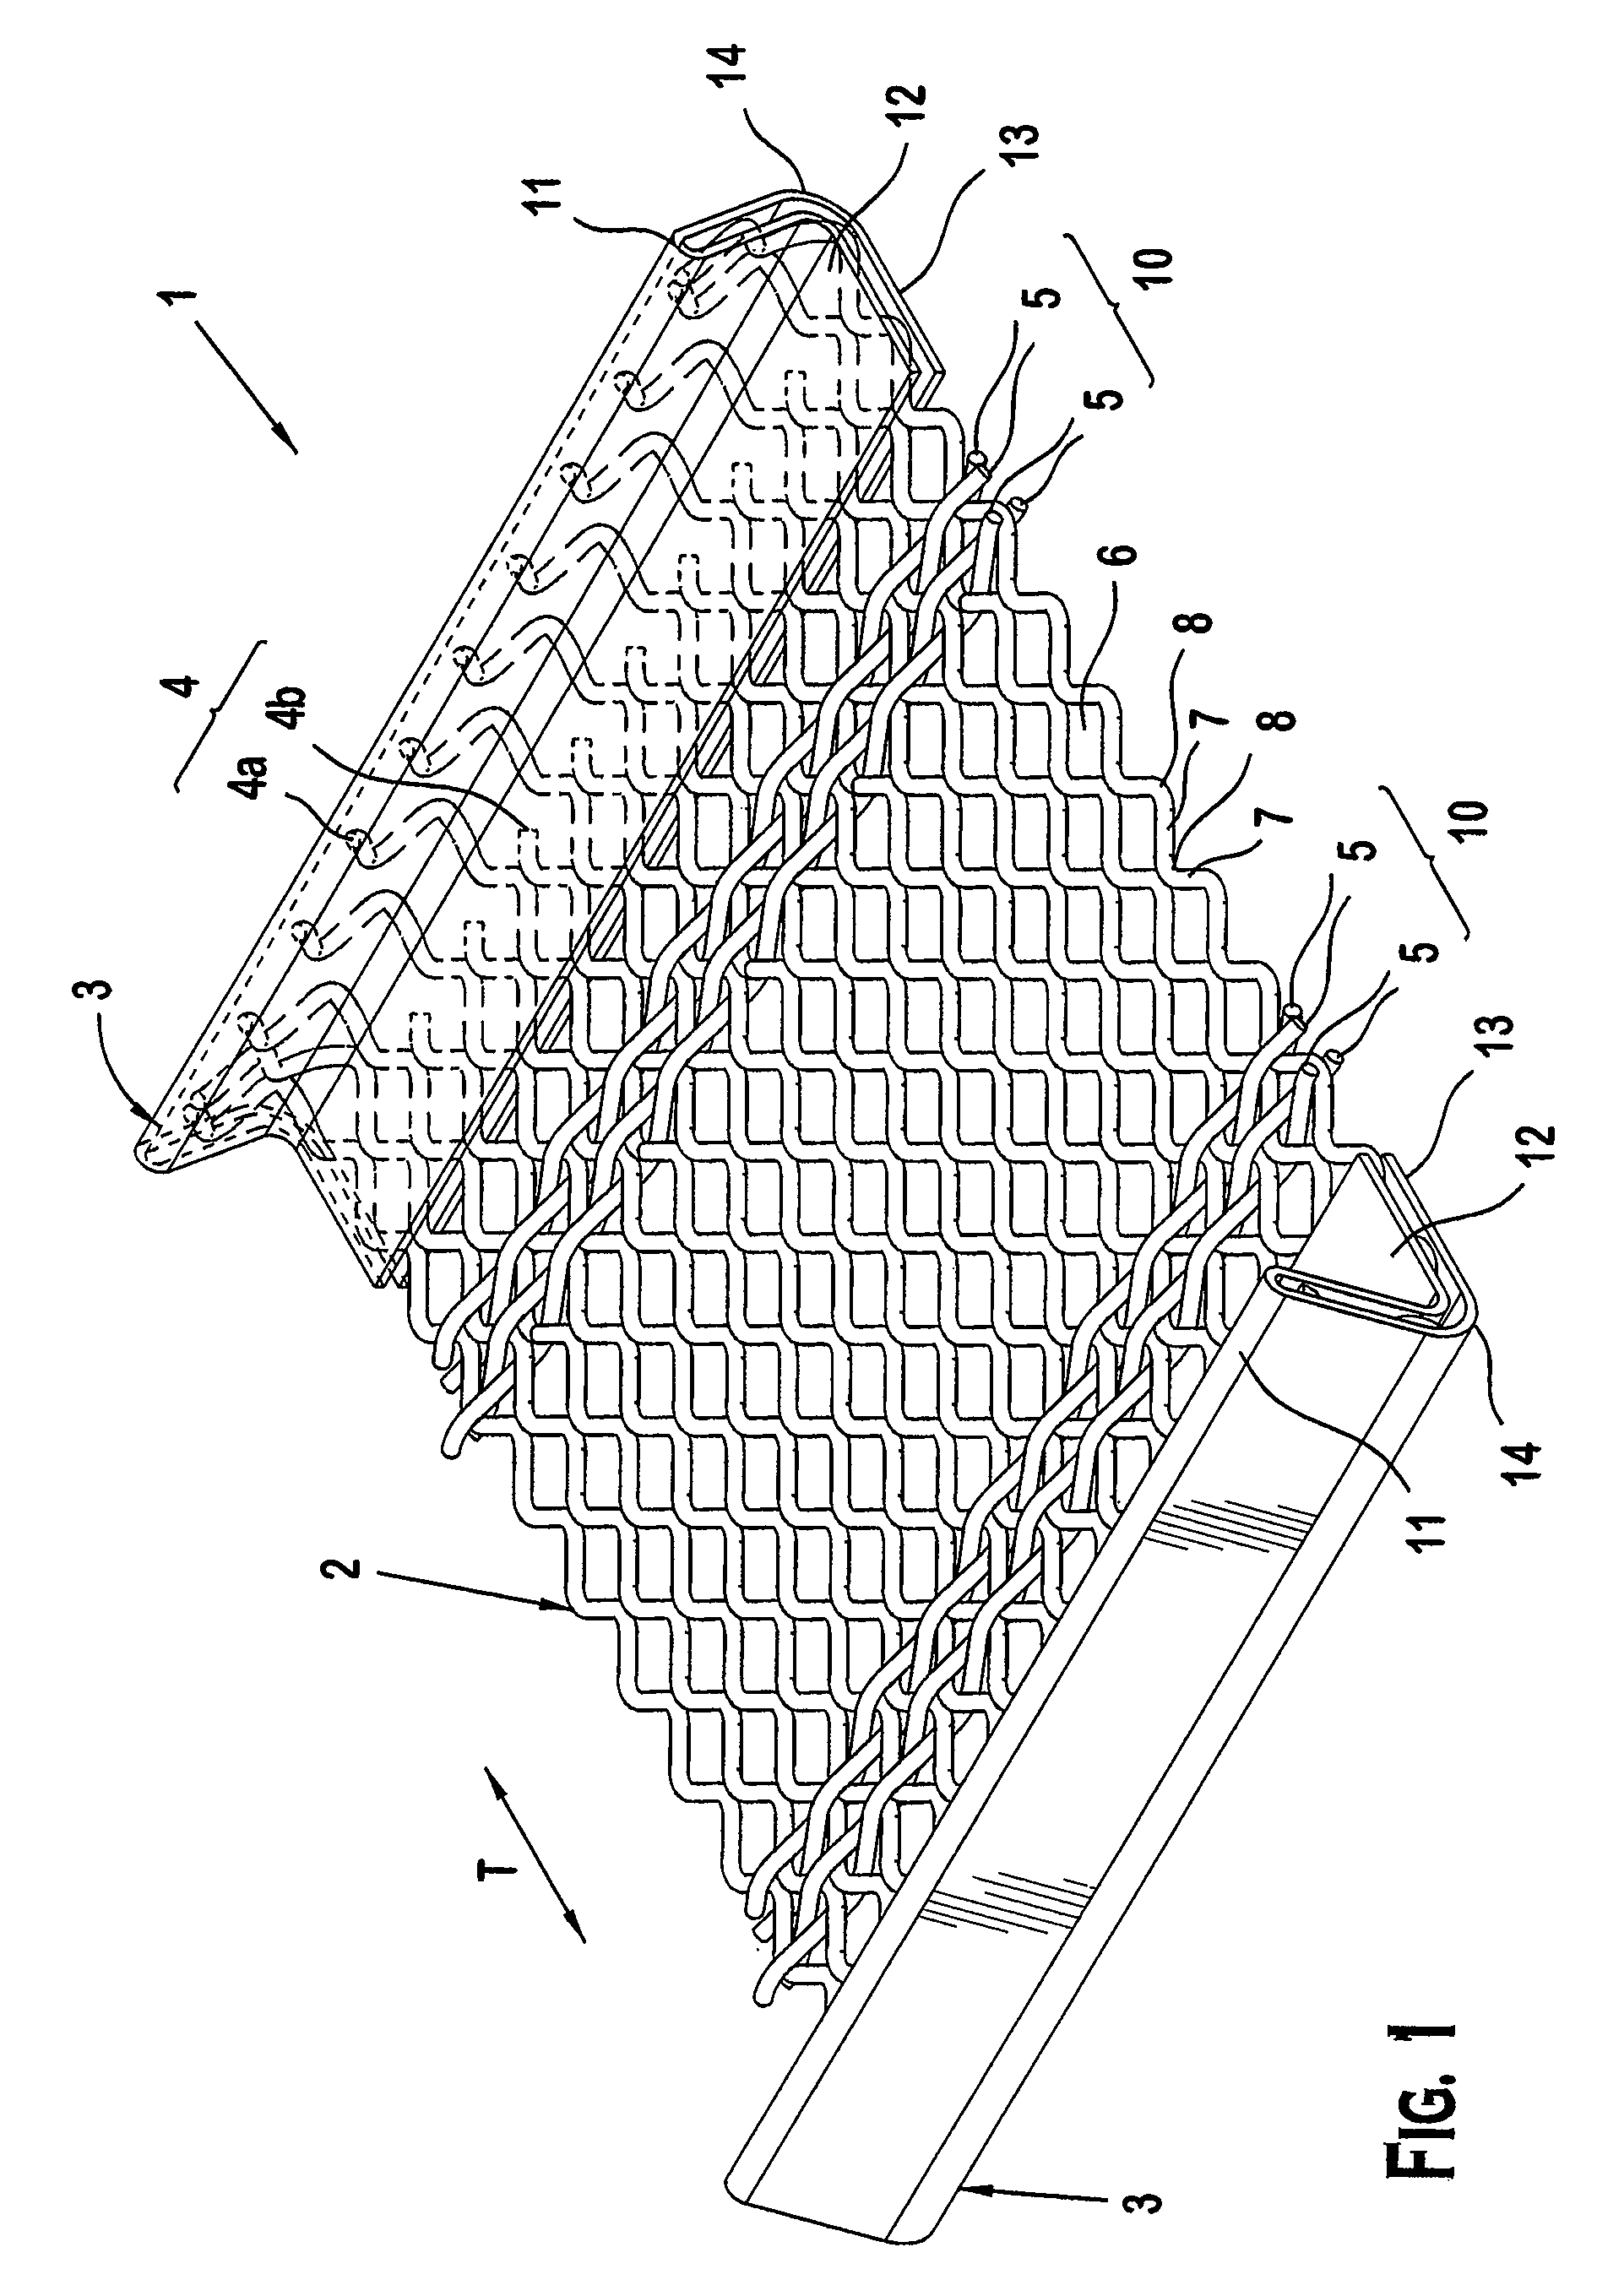 Screen for a Vibratory Separator Having Tension Reduction Feature